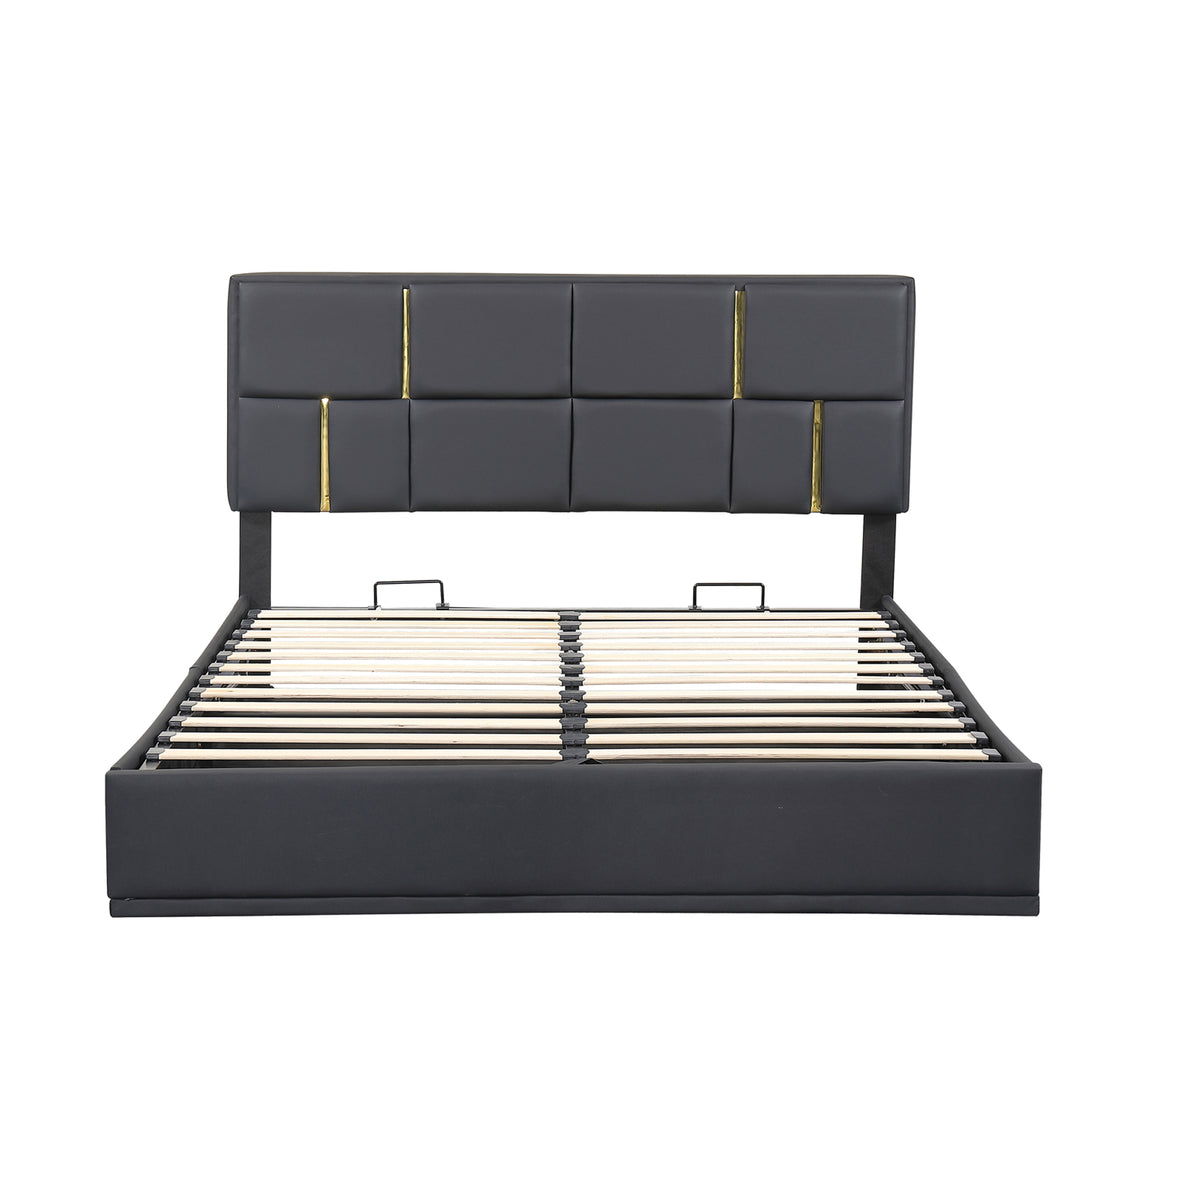 2-Pieces Bedroom Sets,Queen Size Upholstered Platform Bed with Hydraulic Storage System,Storage Ottoman with Metal Legs,Black